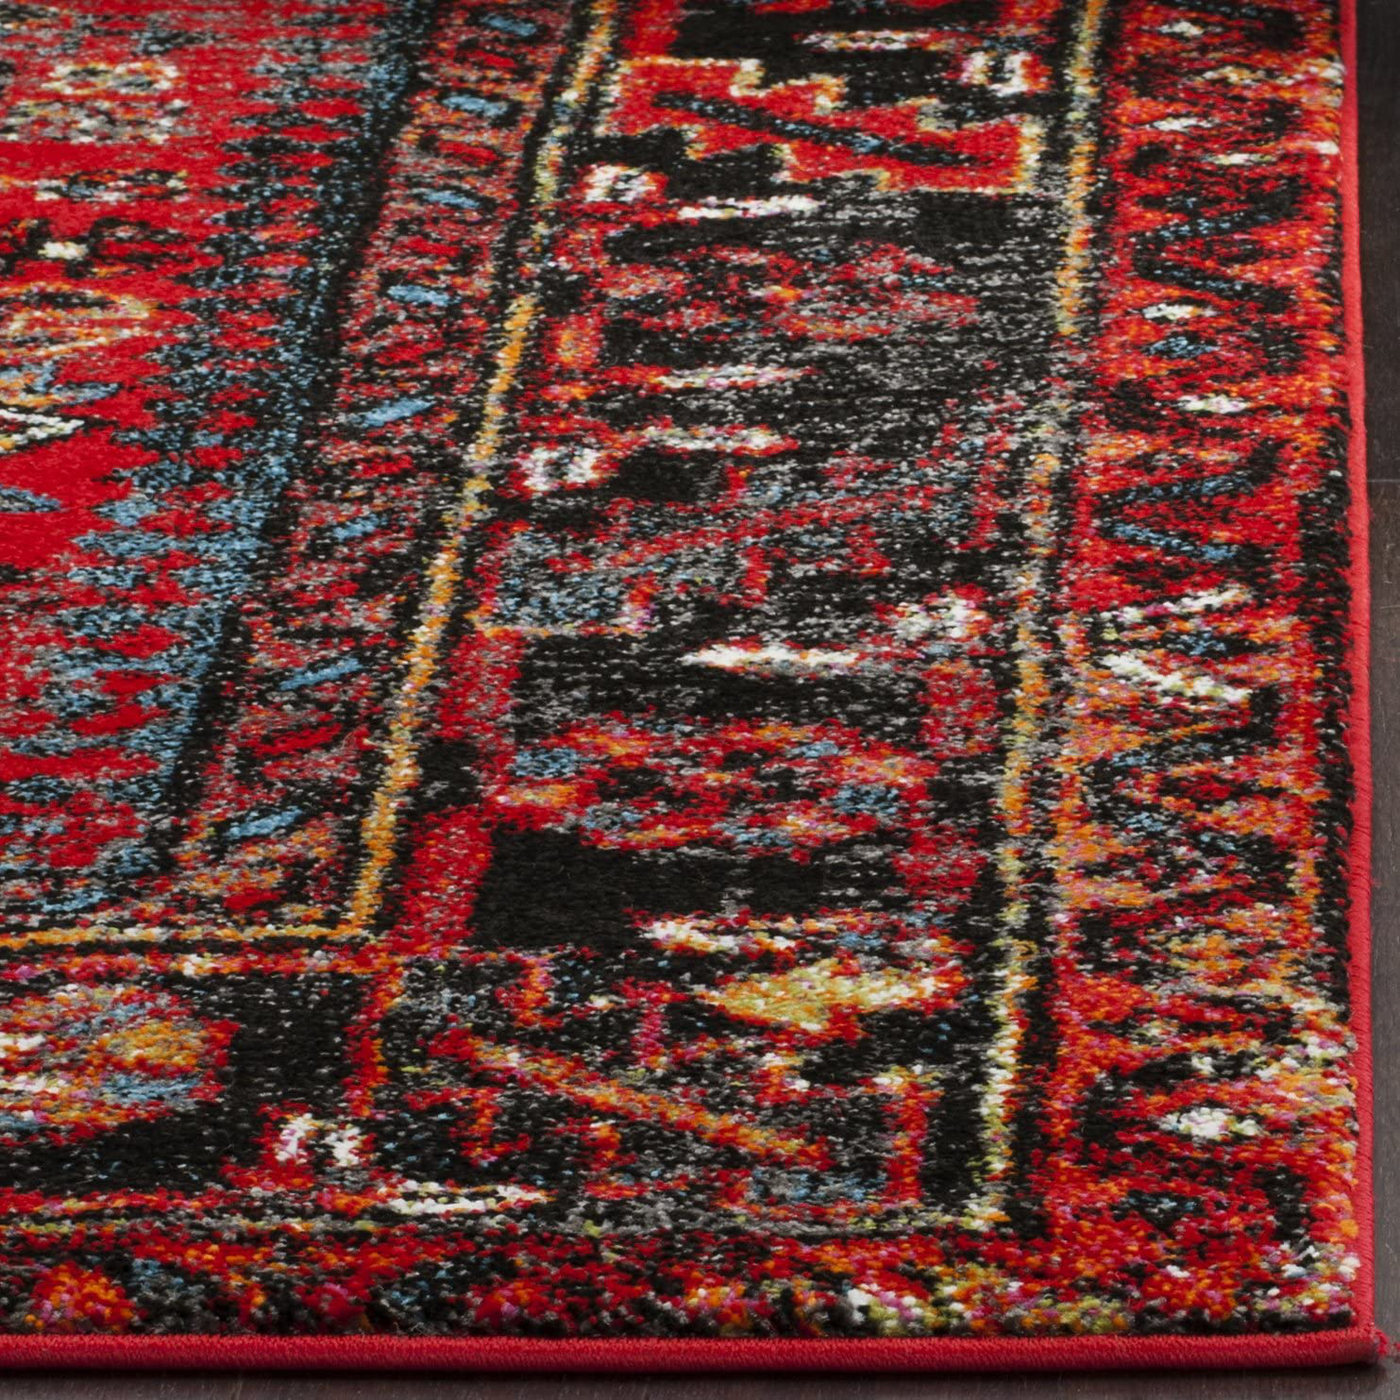 Safavieh Vintage Hamadan Collection VTH211A Oriental Traditional Persian Non-Shedding Stain Resistant Living Room Bedroom Runner, 2'3" x 8' , Red / Multi